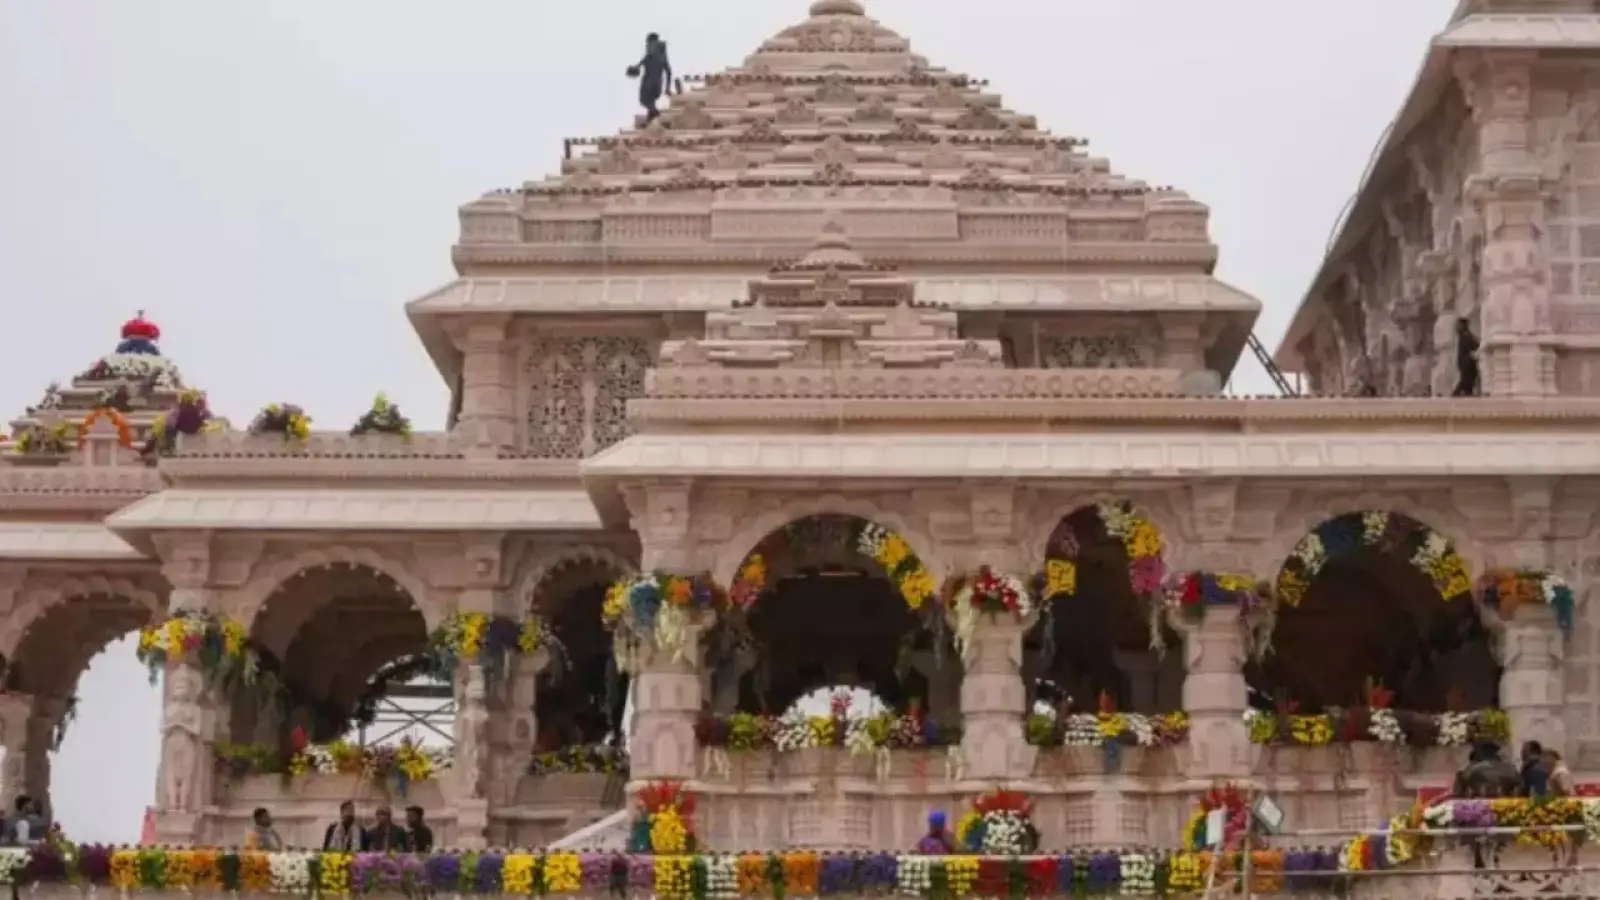 Ram Mandir: Government has mandated that social media platforms remove all images and videos